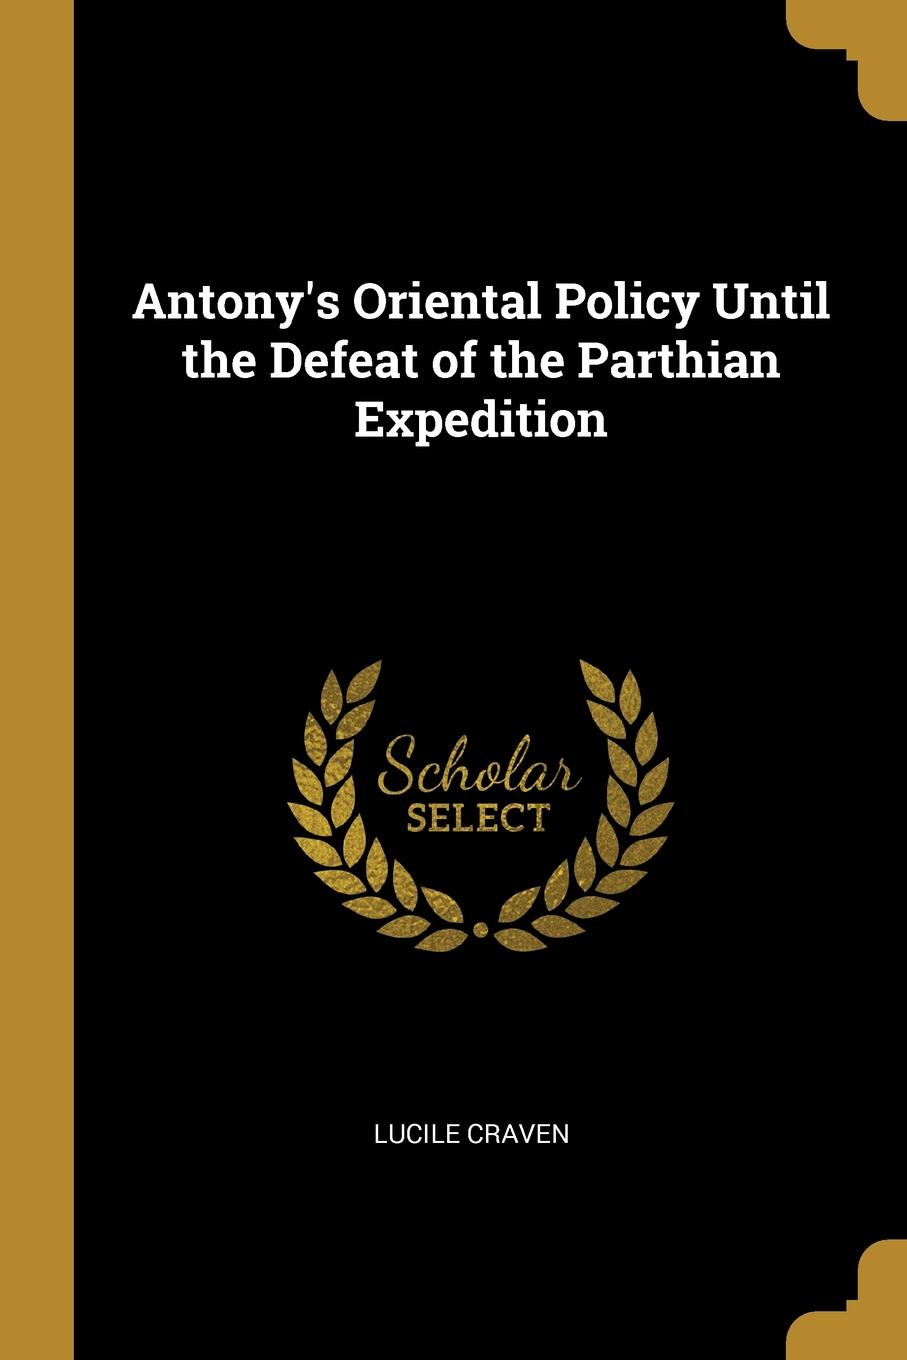 Antony.s Oriental Policy Until the Defeat of the Parthian Expedition